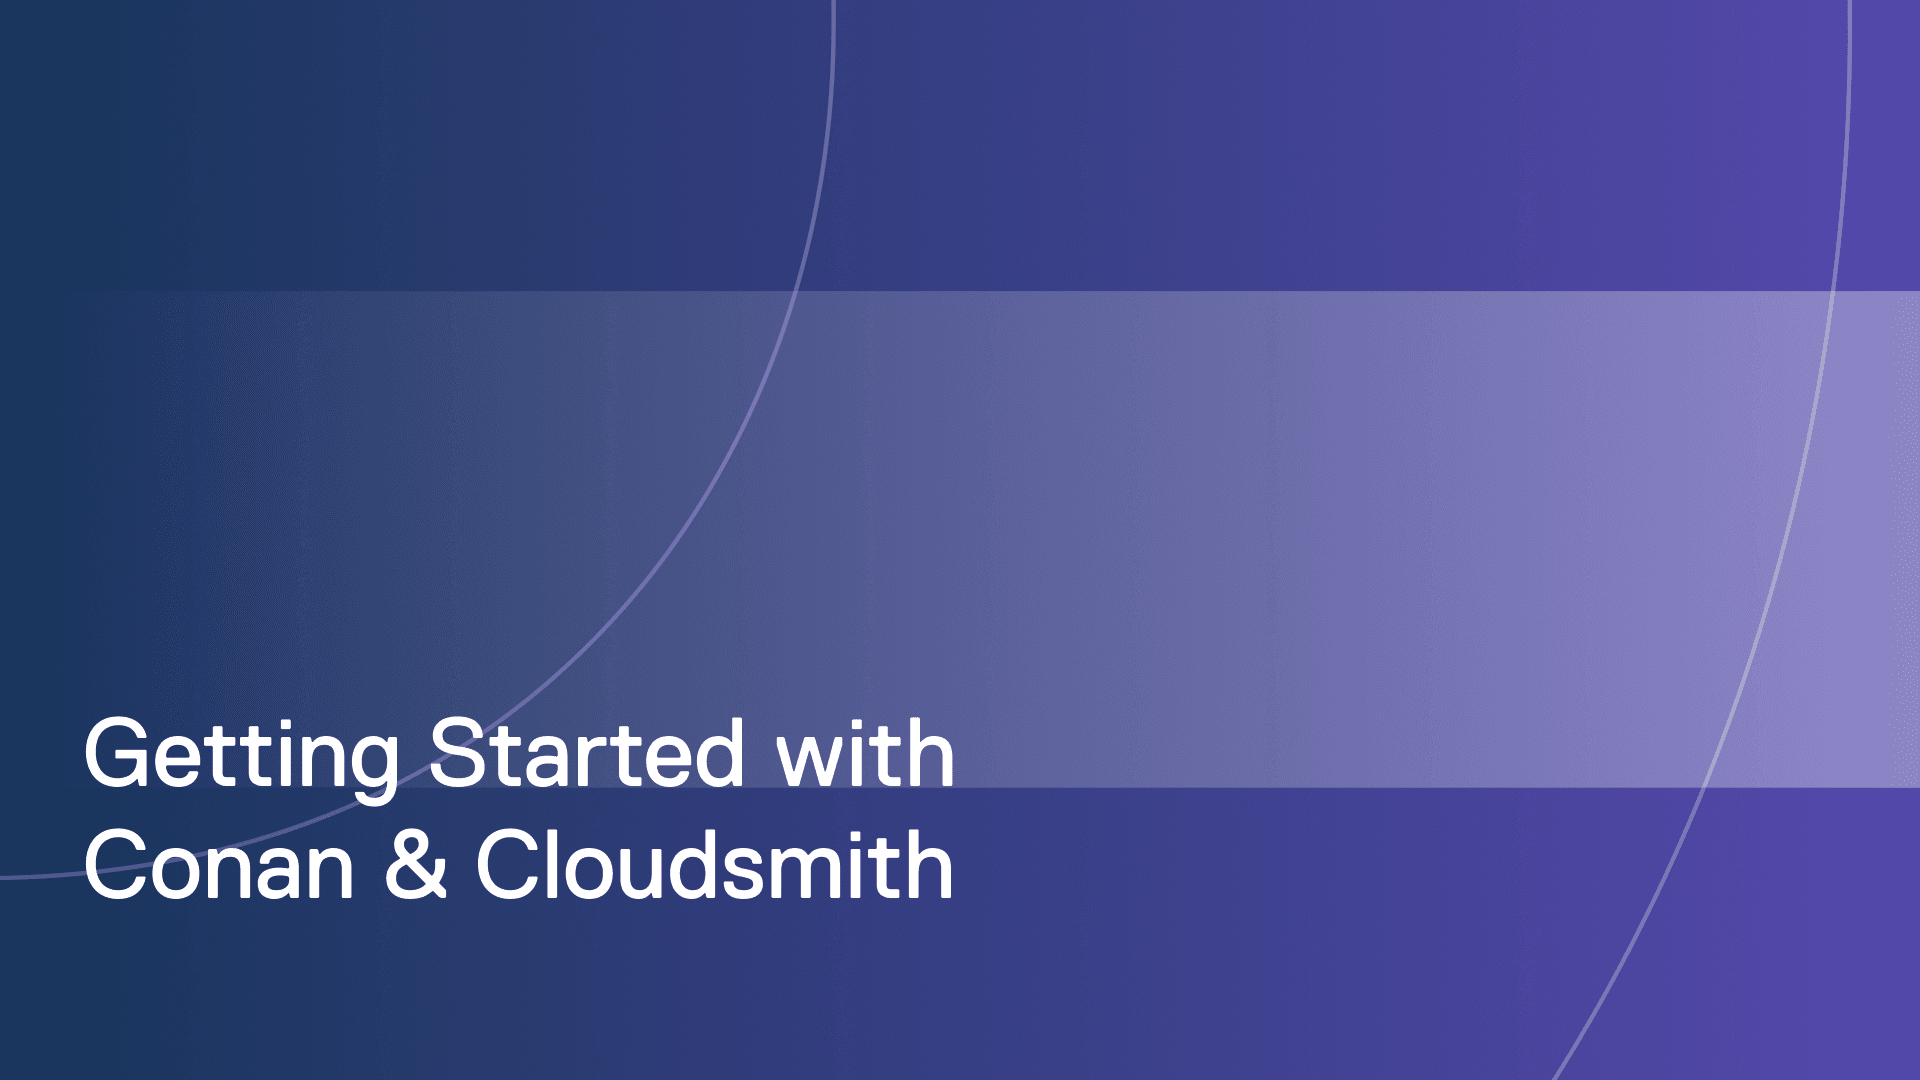 Getting started with Conan and Cloudsmith